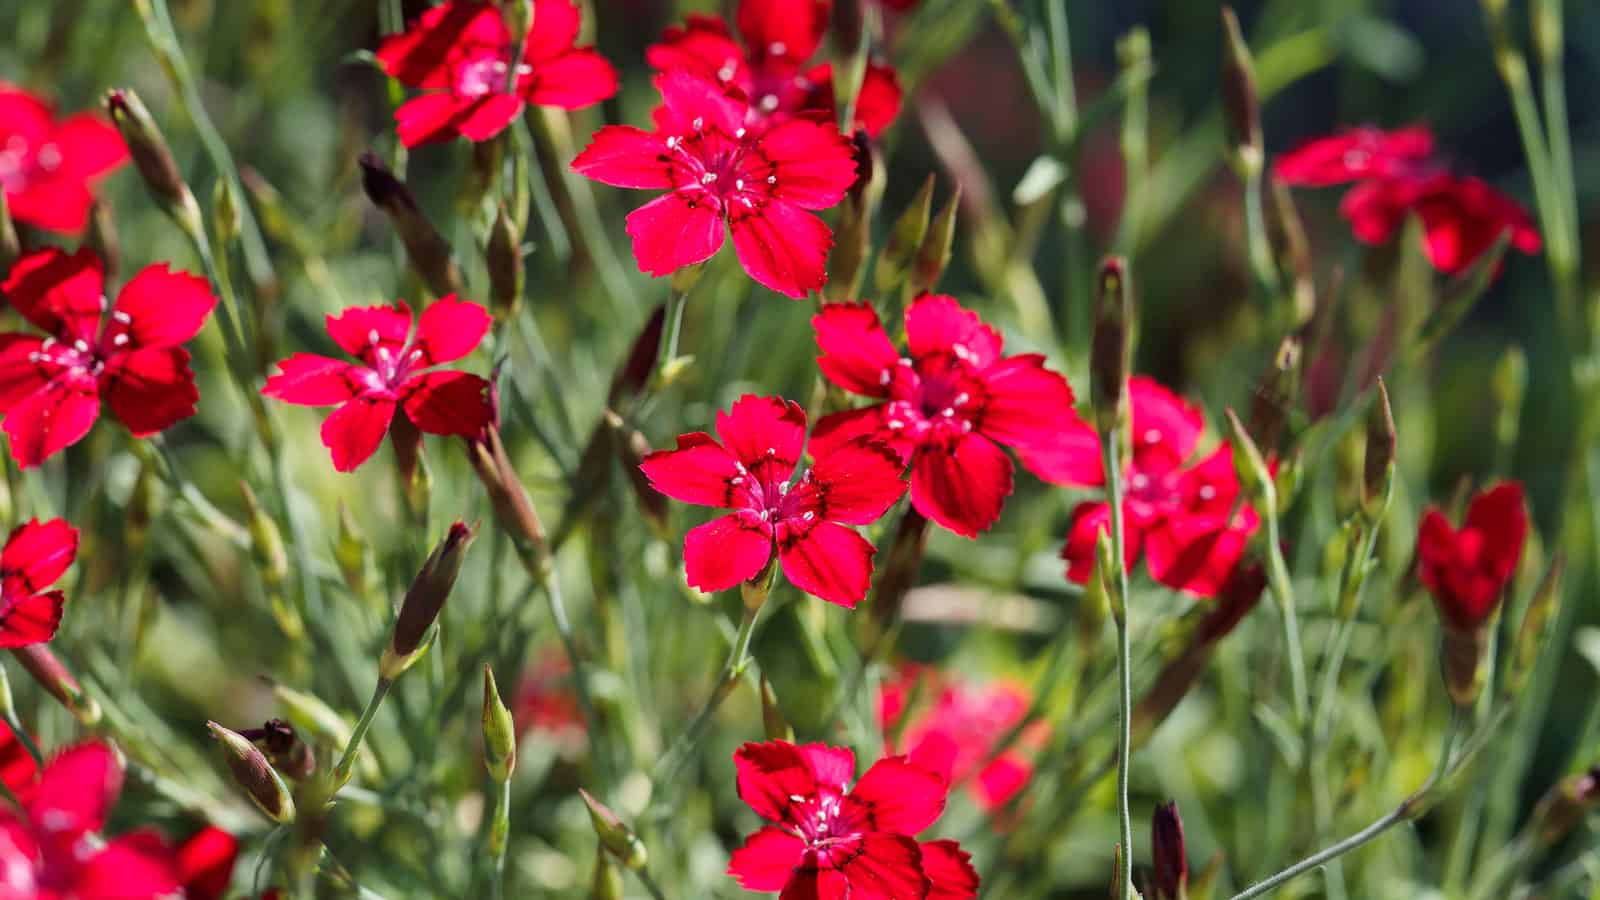 Blooming red petals of a Frosty fire dianthus